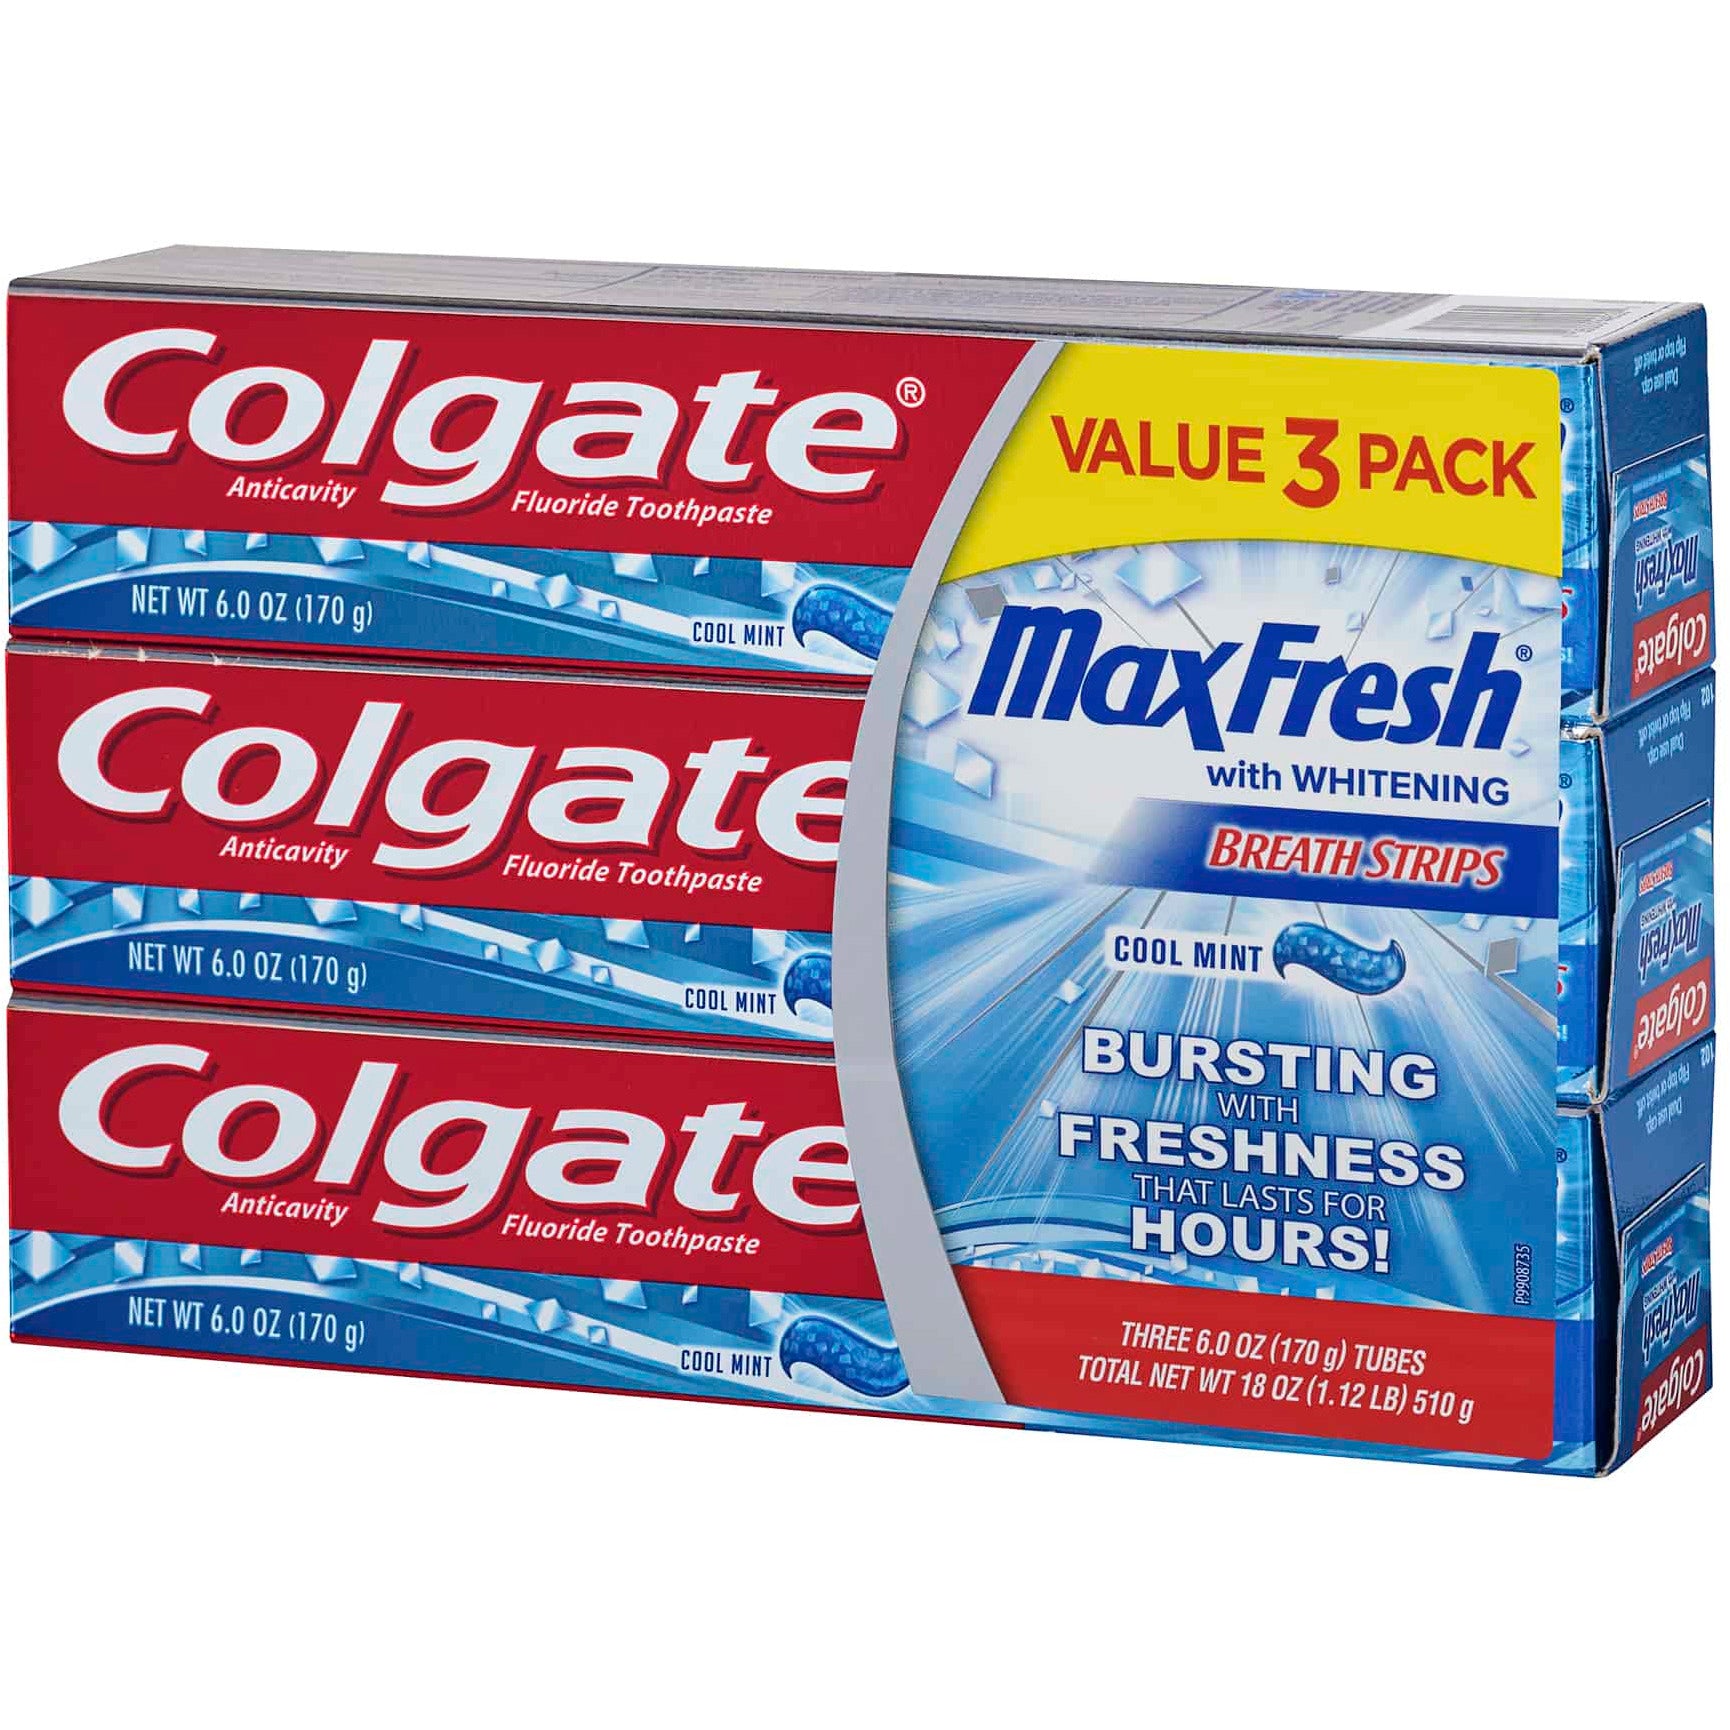 Colgate Max Fresh Toothpaste, Cool Mint - 6oz (3 Pack)